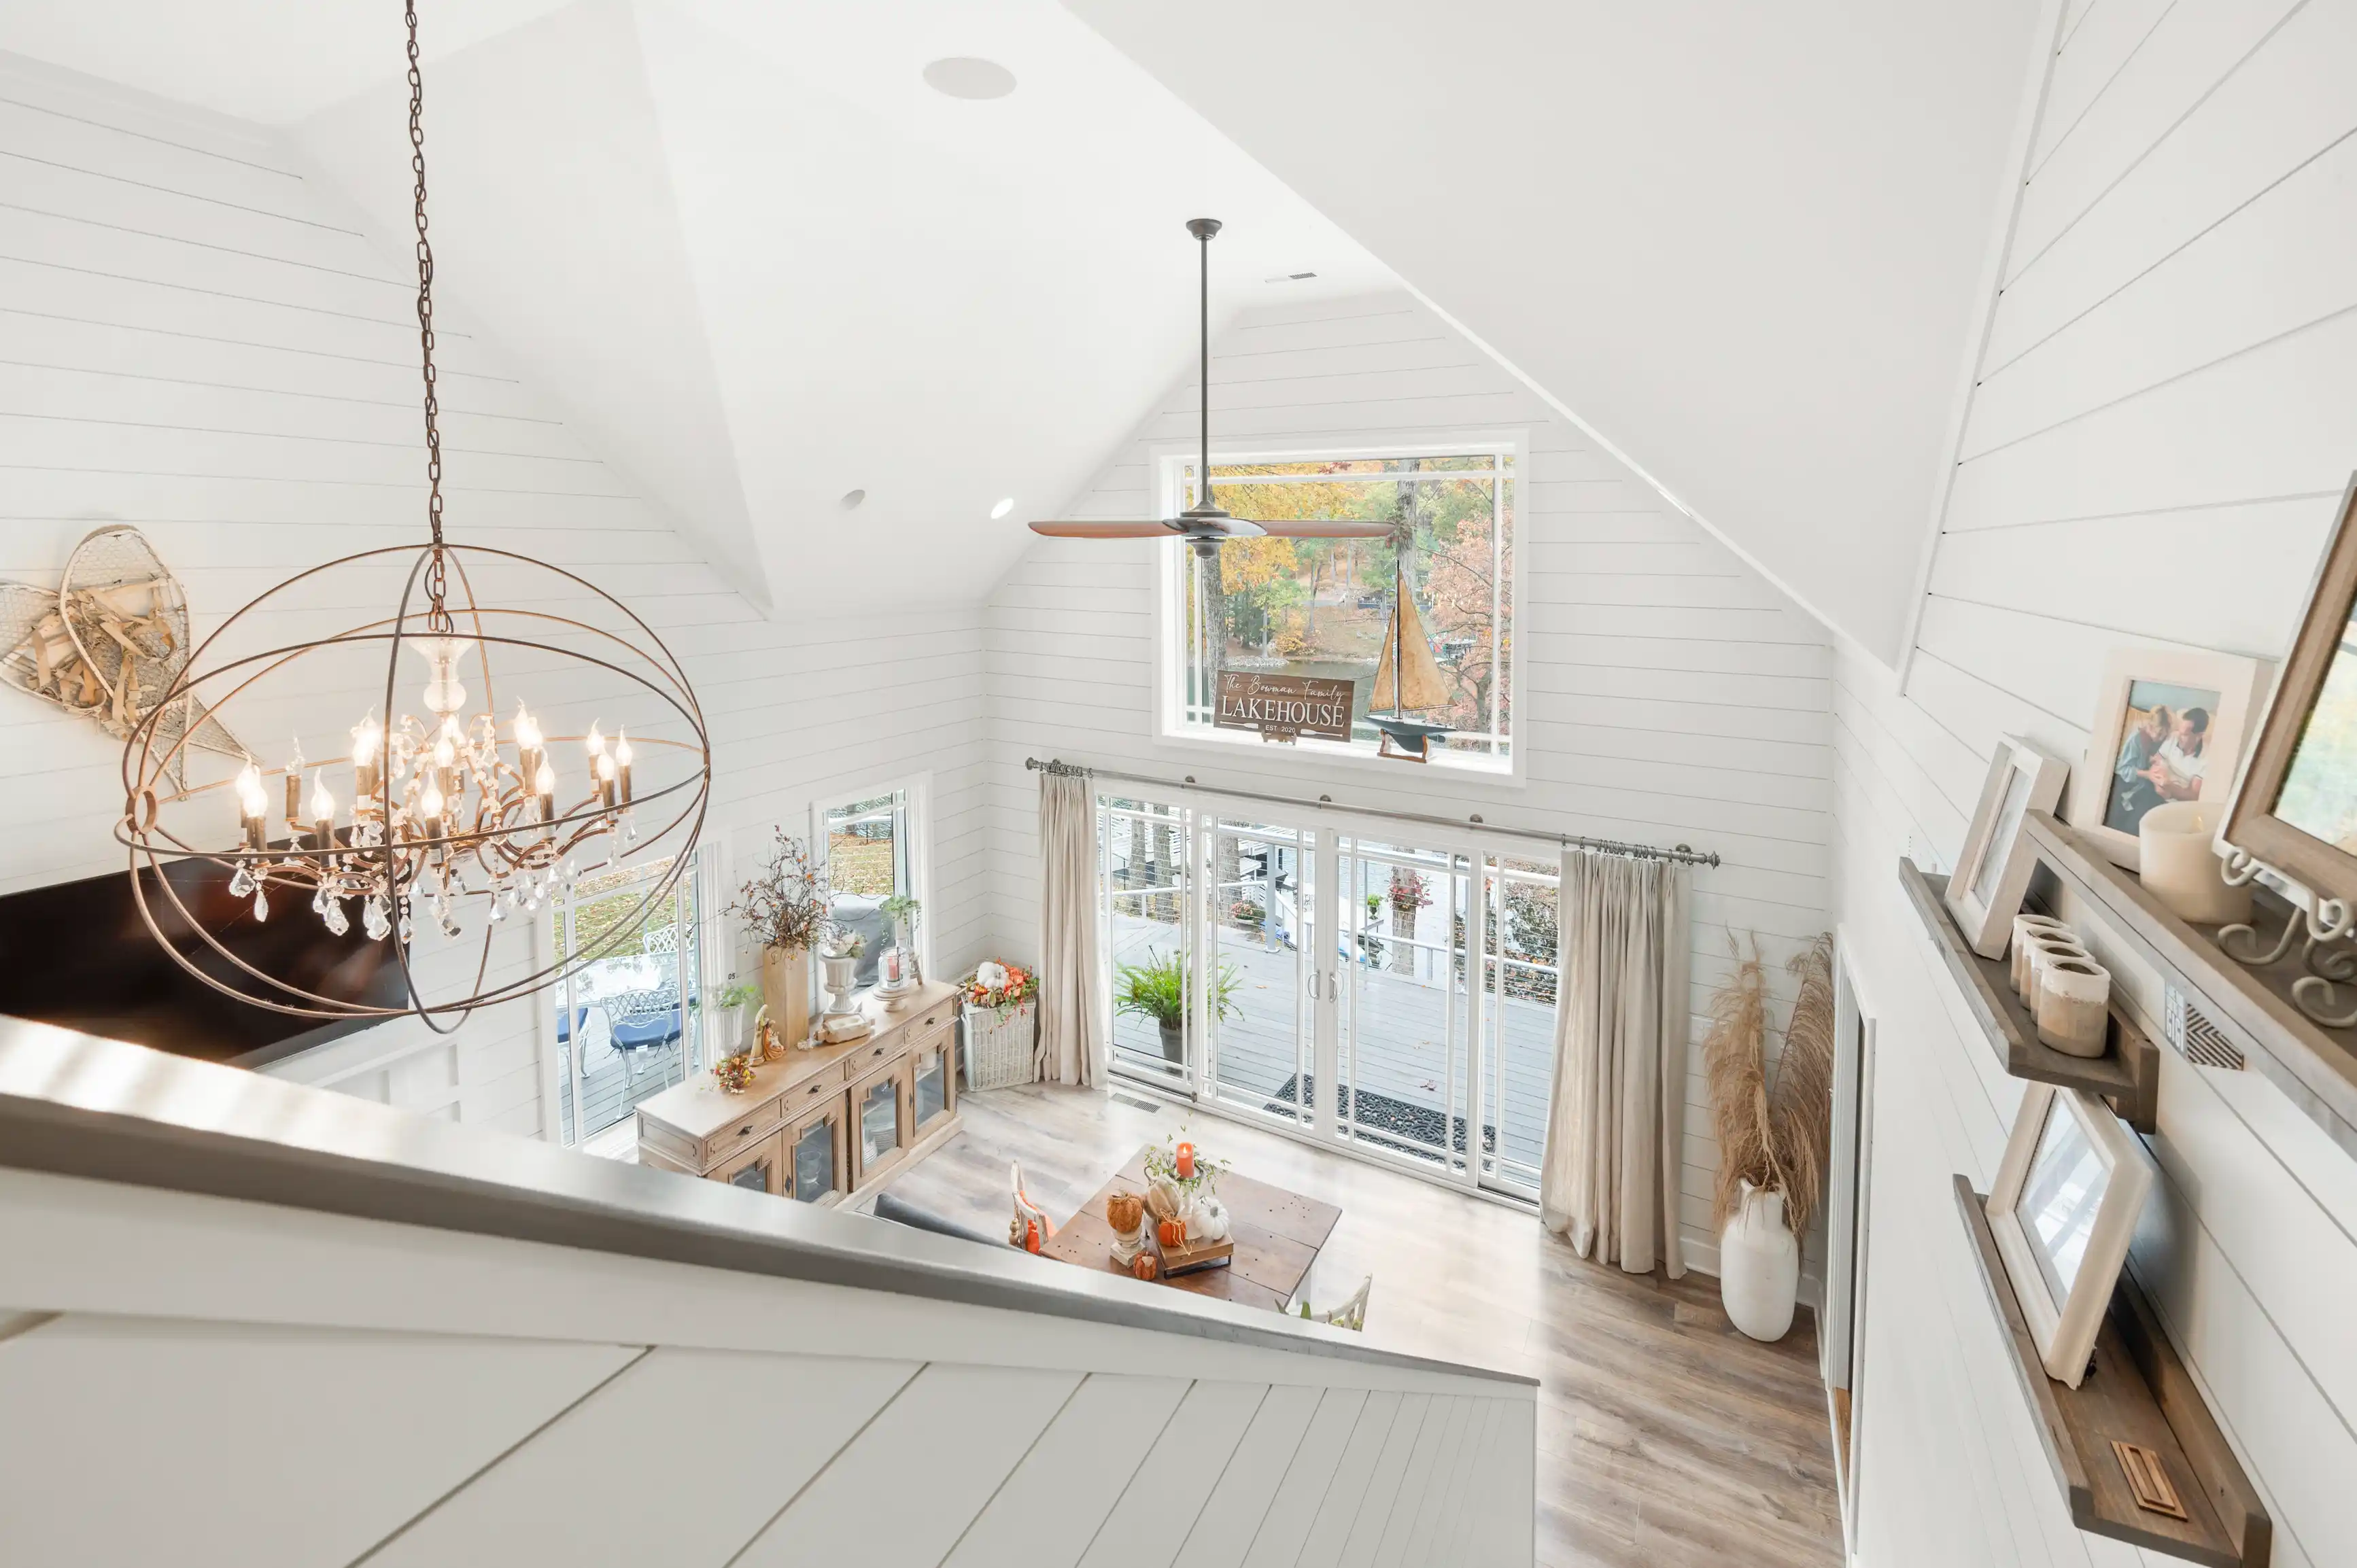 Bright and airy dining room interior in a modern farmhouse style with a wooden table, elegant chandelier, white shiplap walls, and a view of trees through large windows.